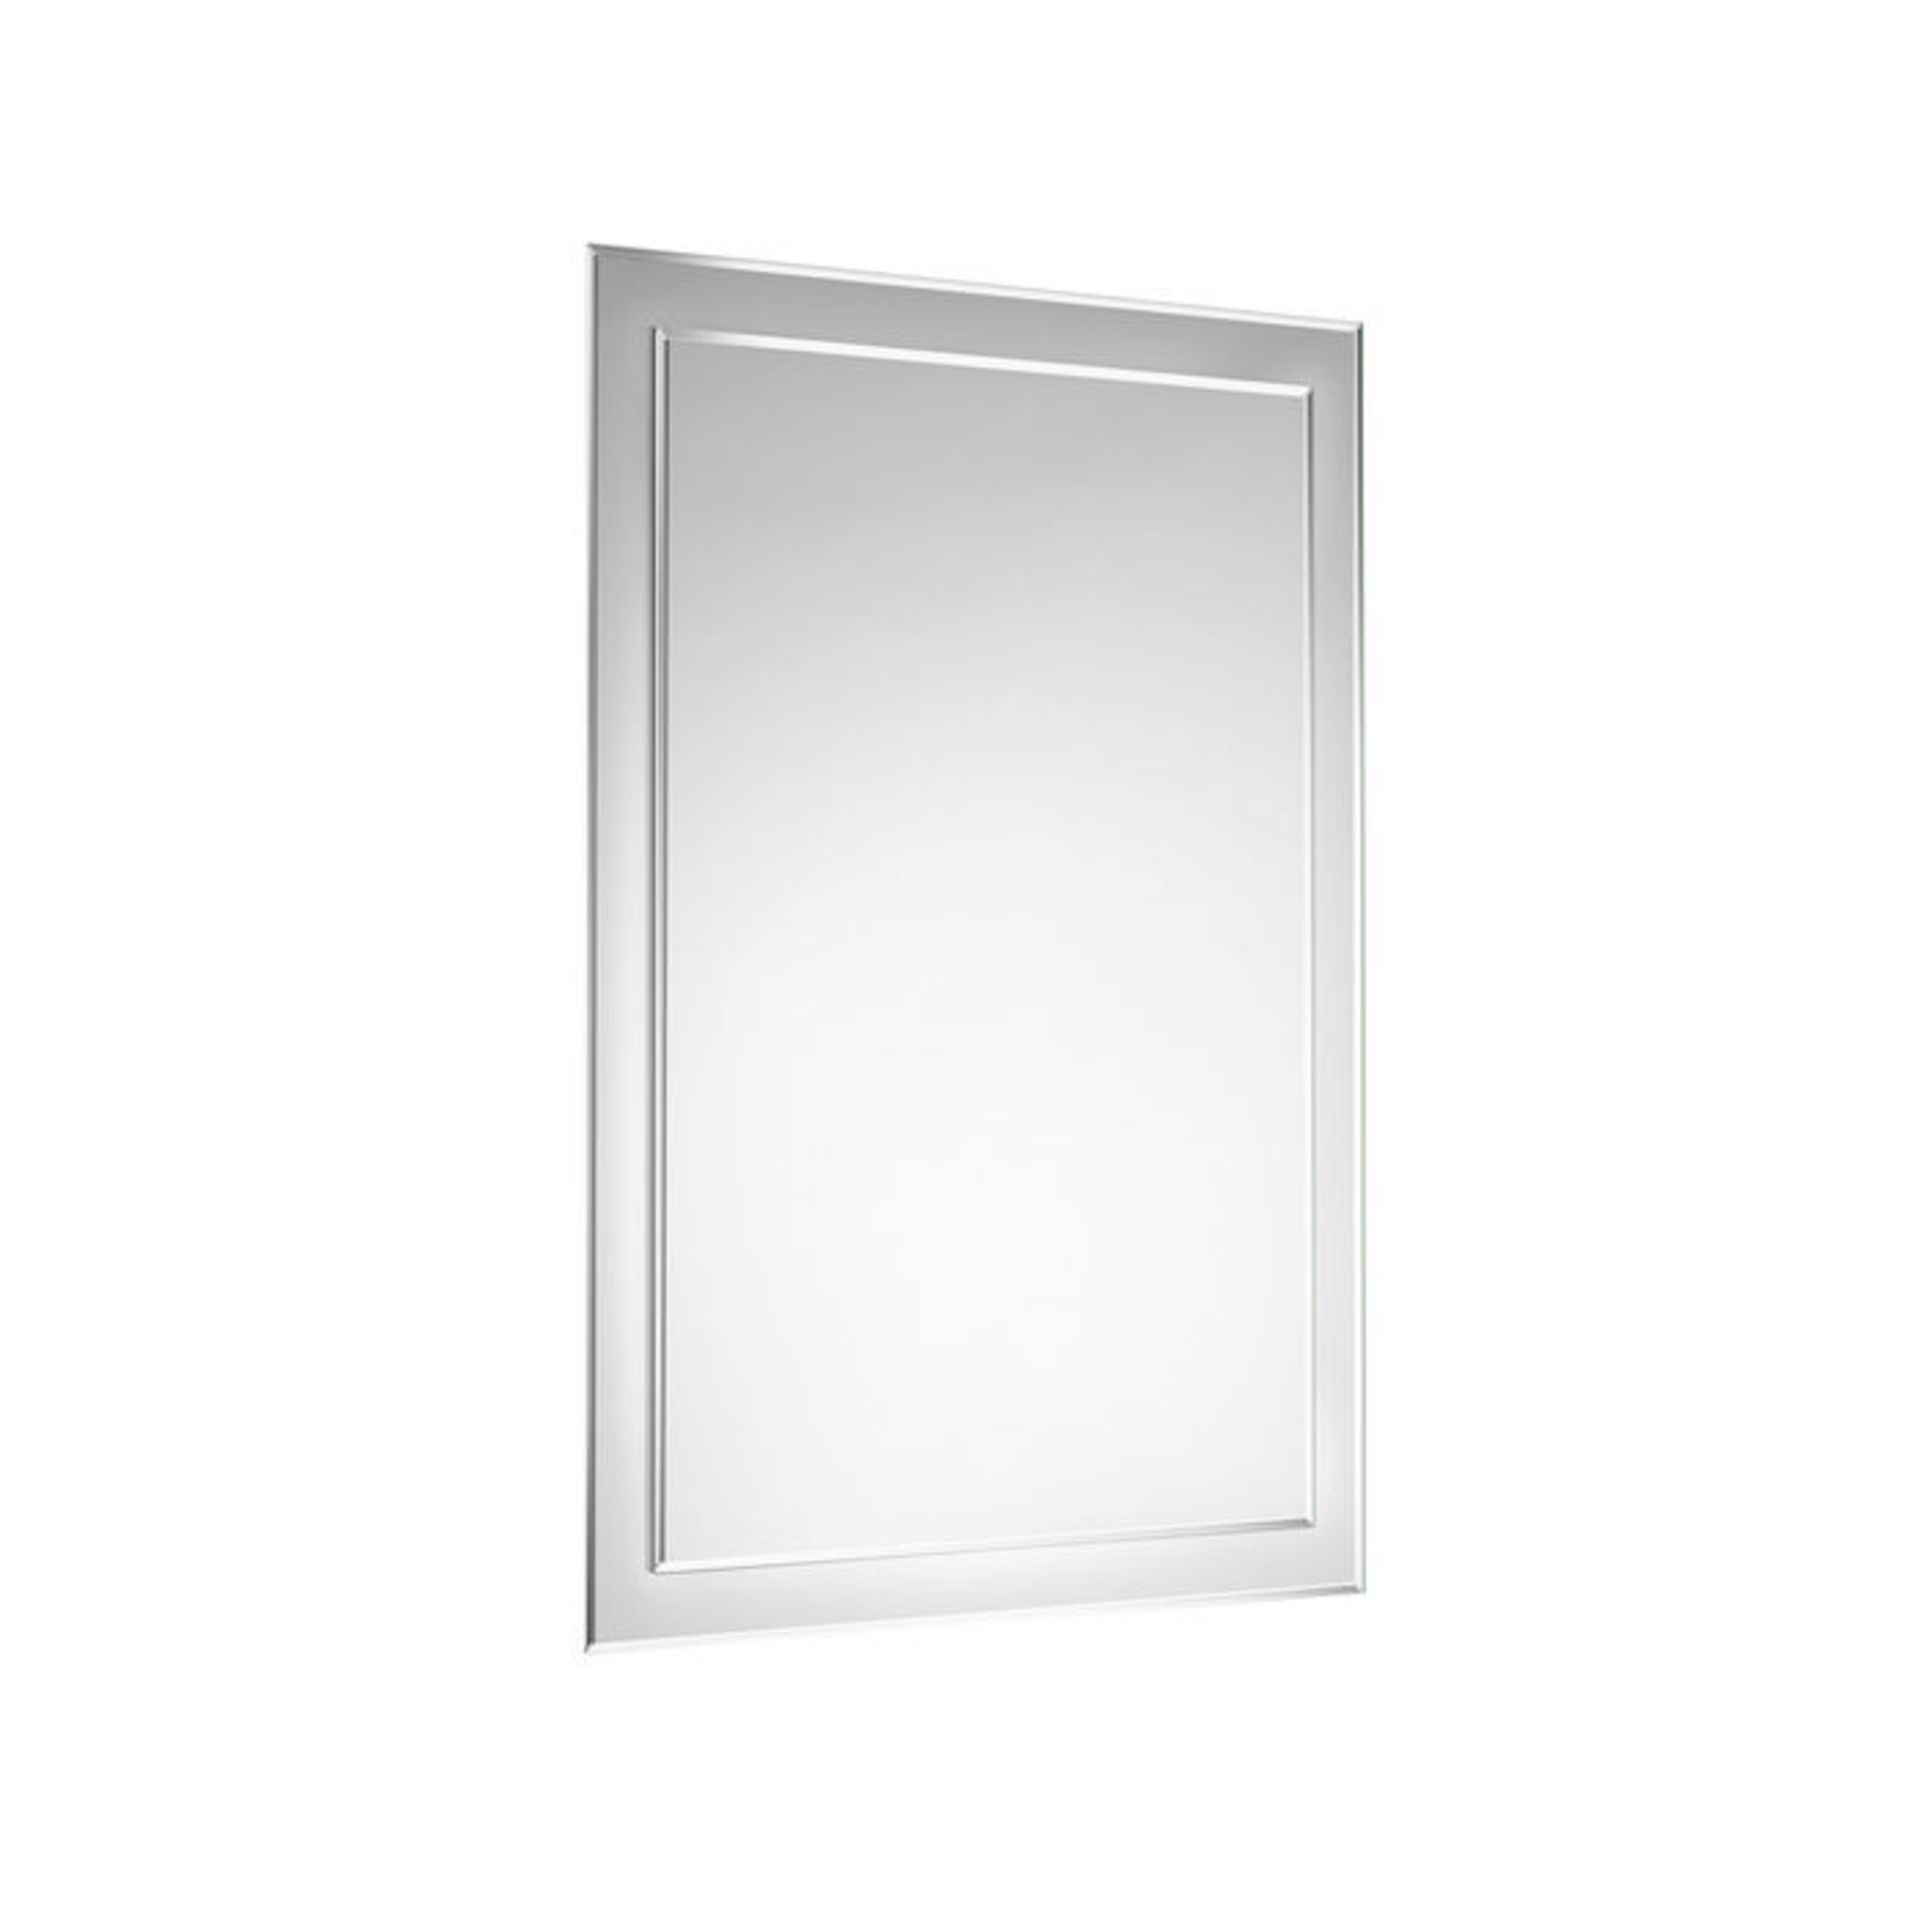 (KR156) 500x700mm Bevel Mirror. Comes fully assembled for added convenience Versatile with a